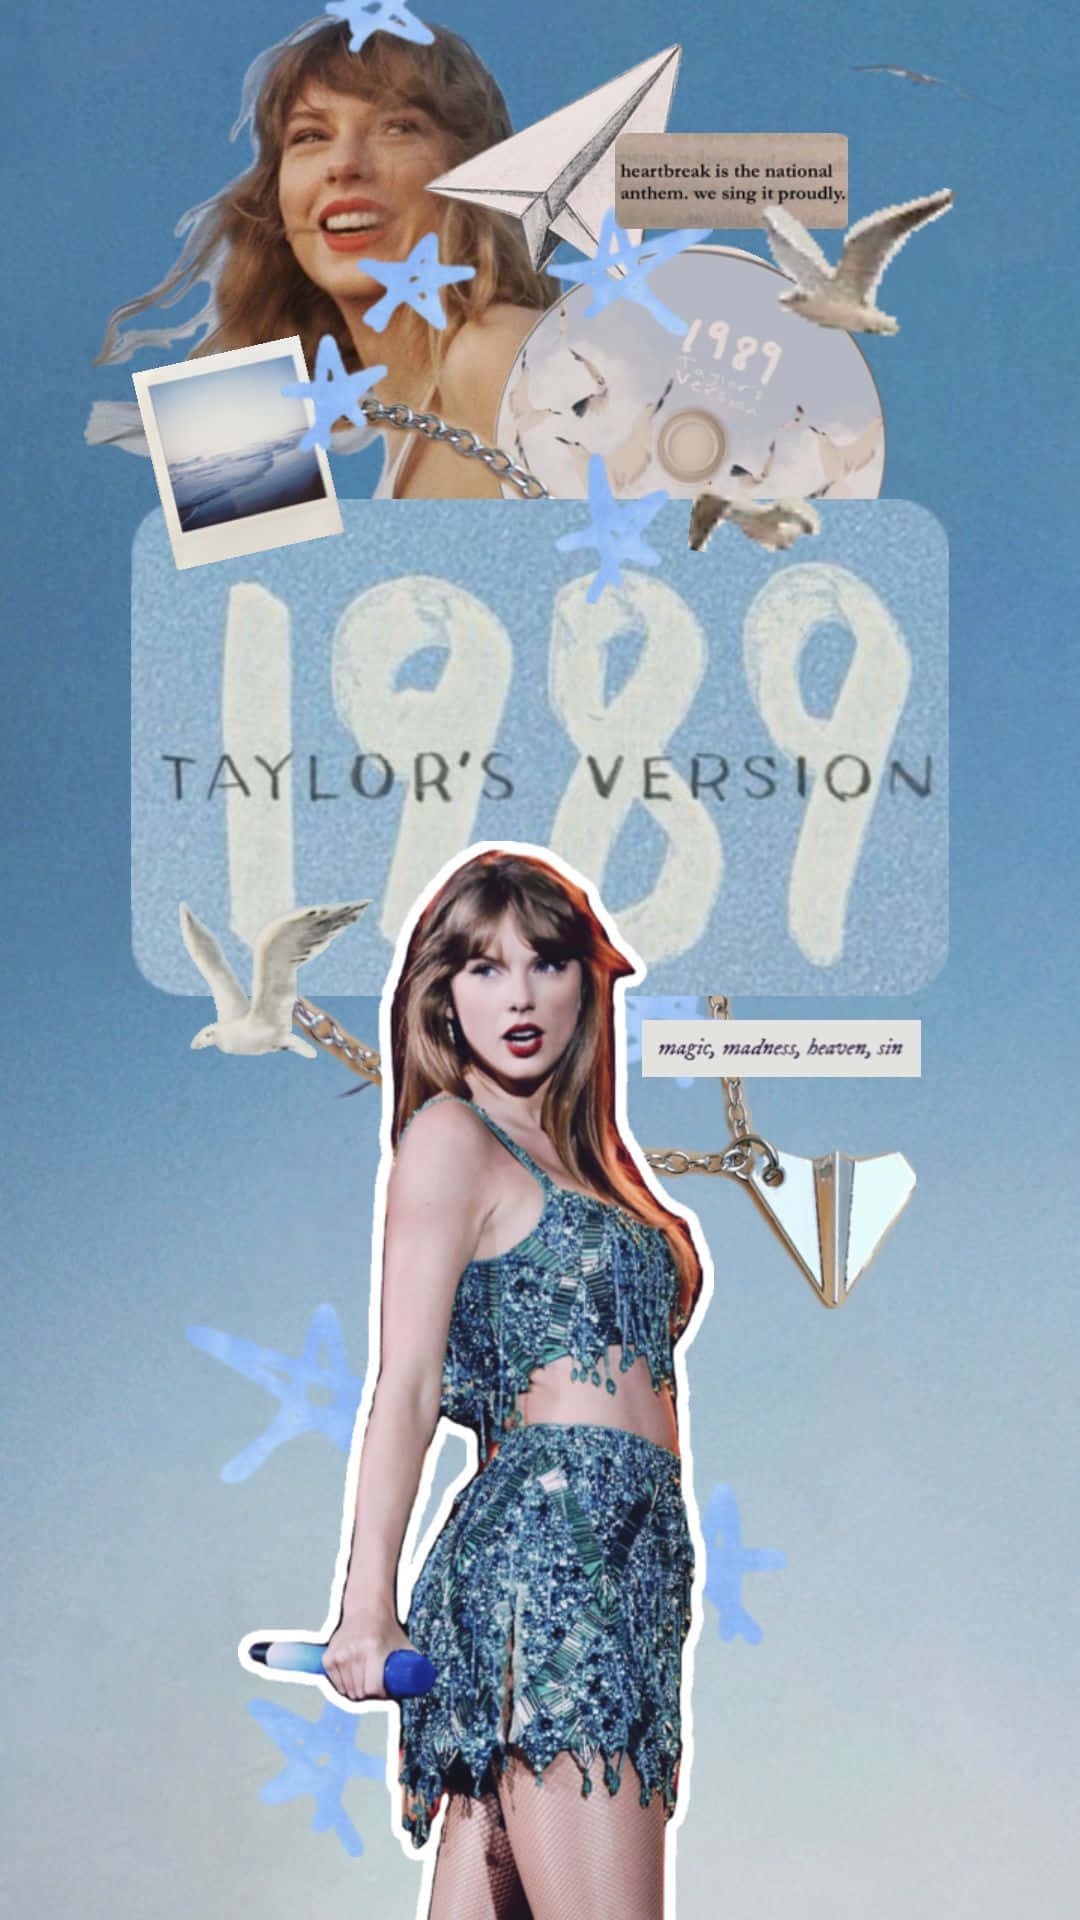 Taylor1989 Taylors Version Collage Wallpaper